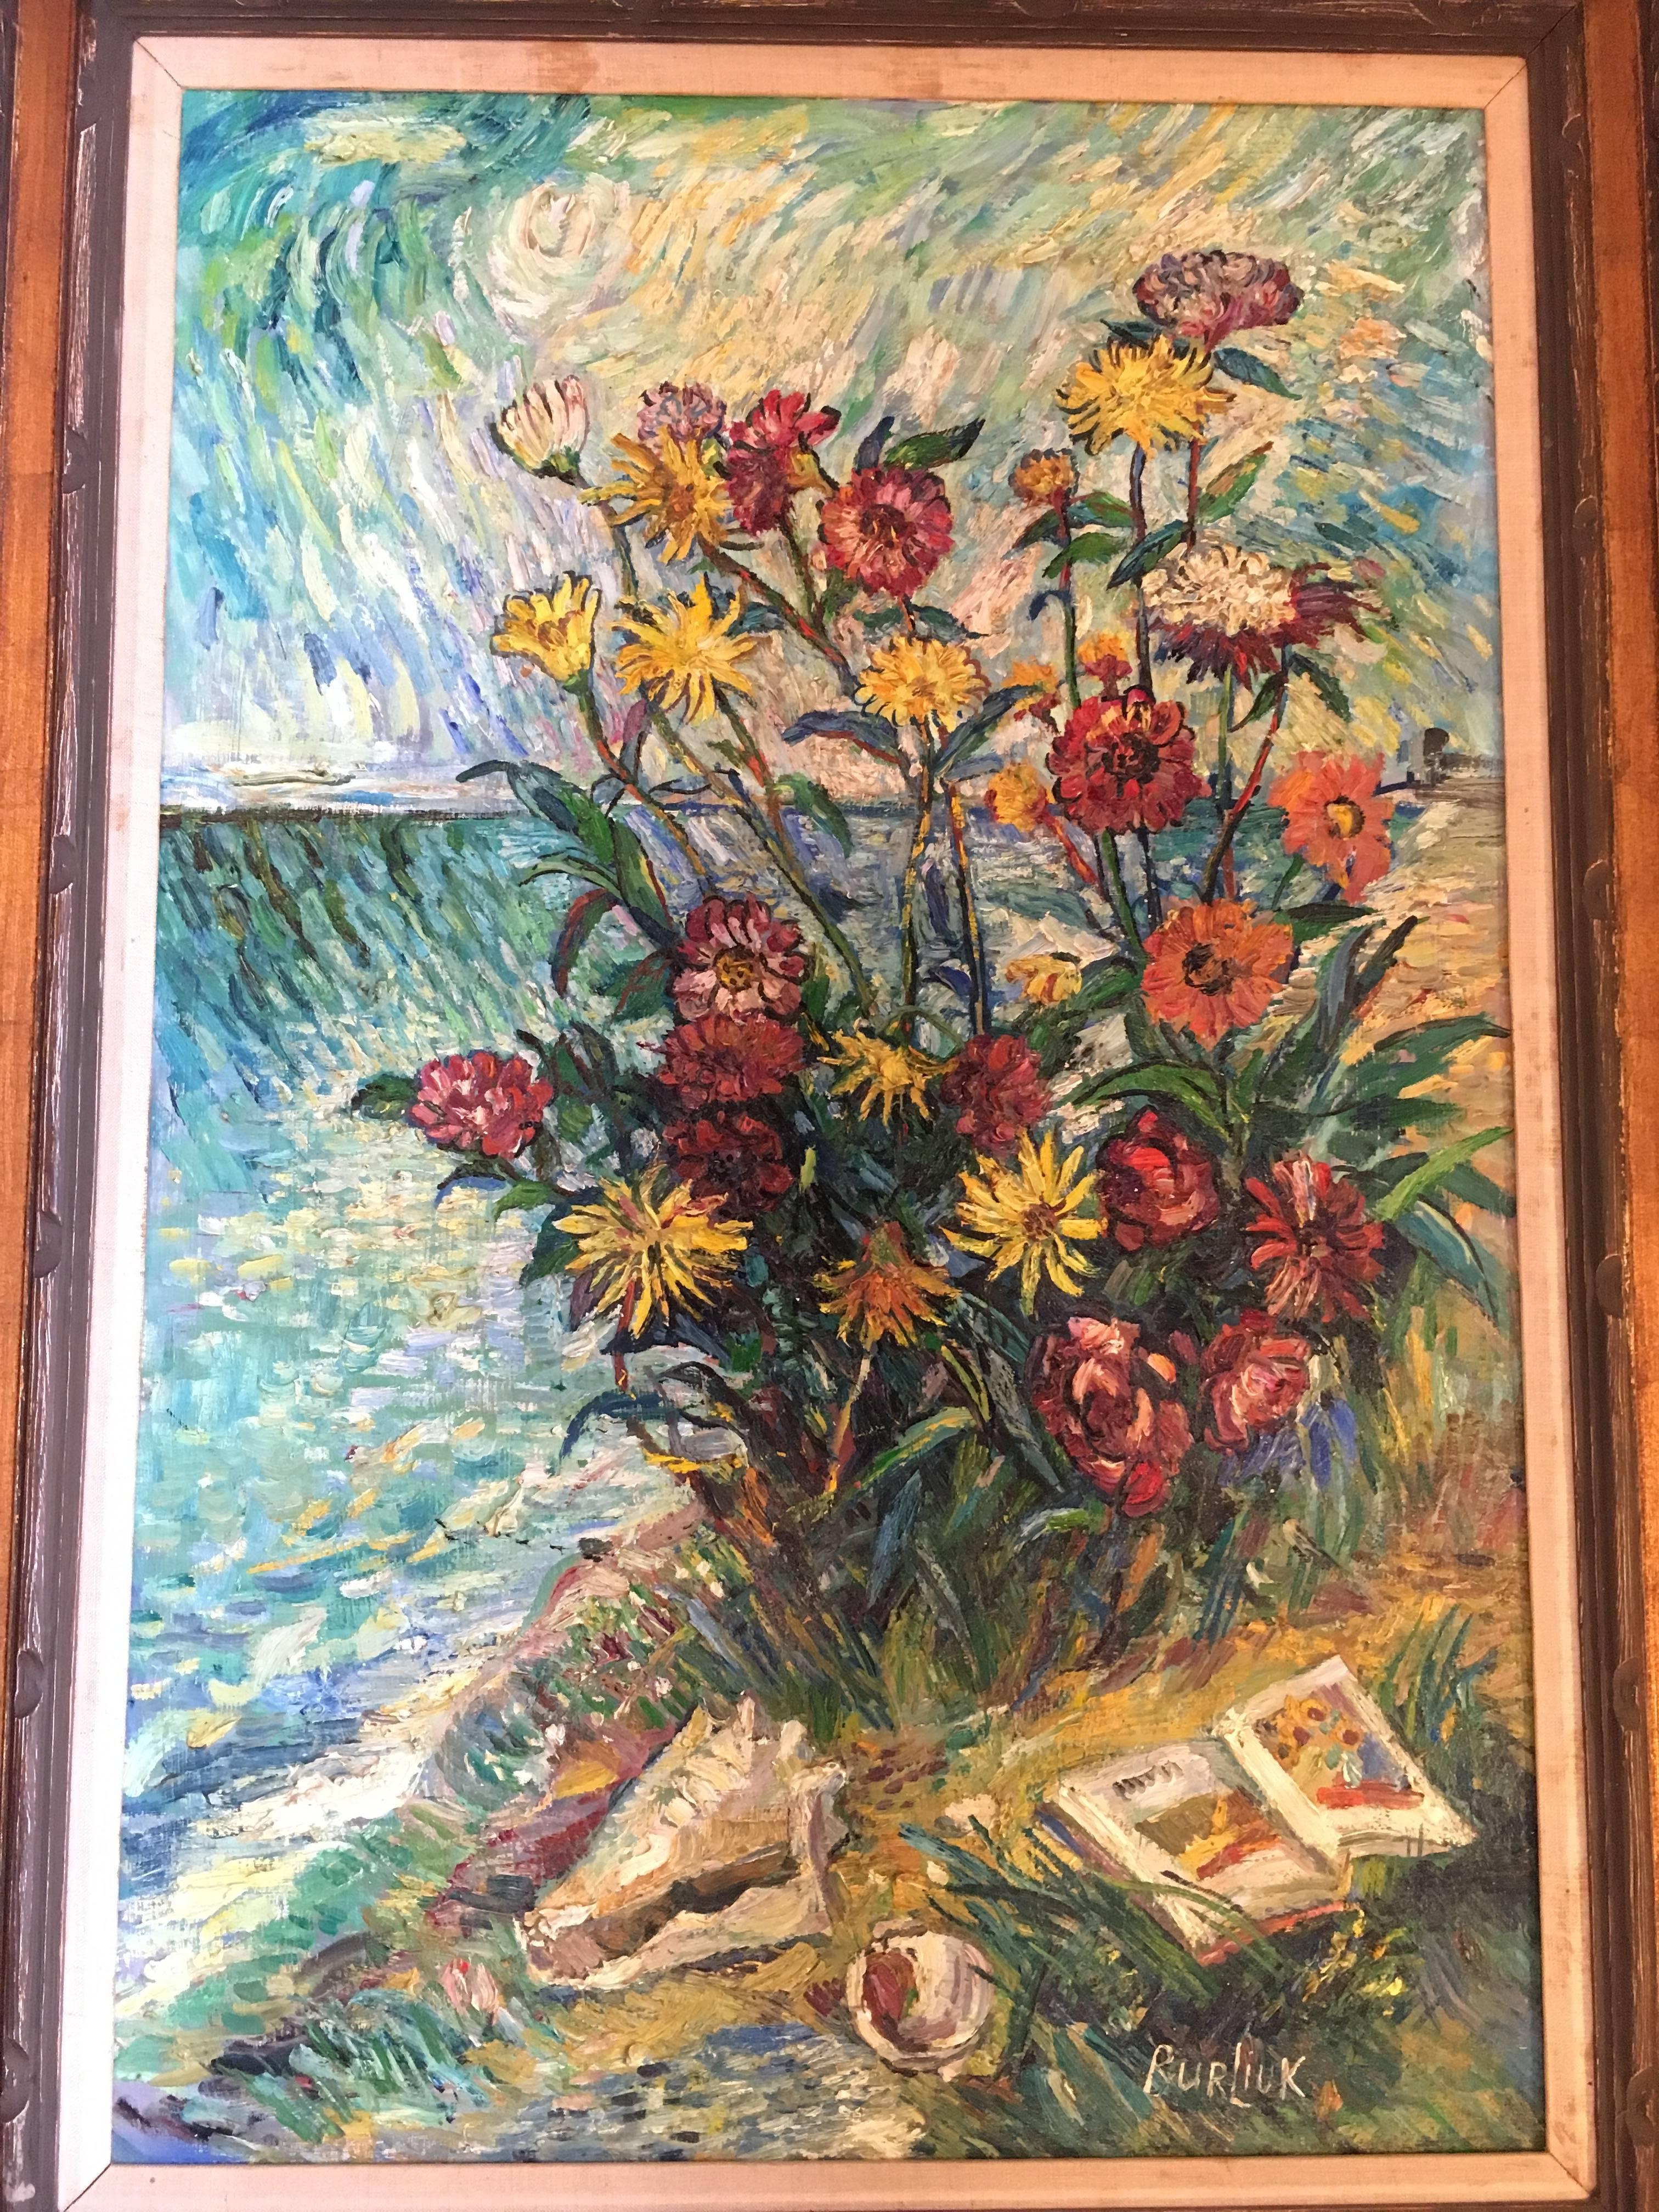 David Burliuk American/Ukrainian (1882-1967) Listed Prov. Christies NY. This fine flower arrangement depicts a person, unseen, reading a book by the sea. Finely painted. 
Unframed 24 inches by 36 inches
Framed 31.5 inches by 43.5 inches.